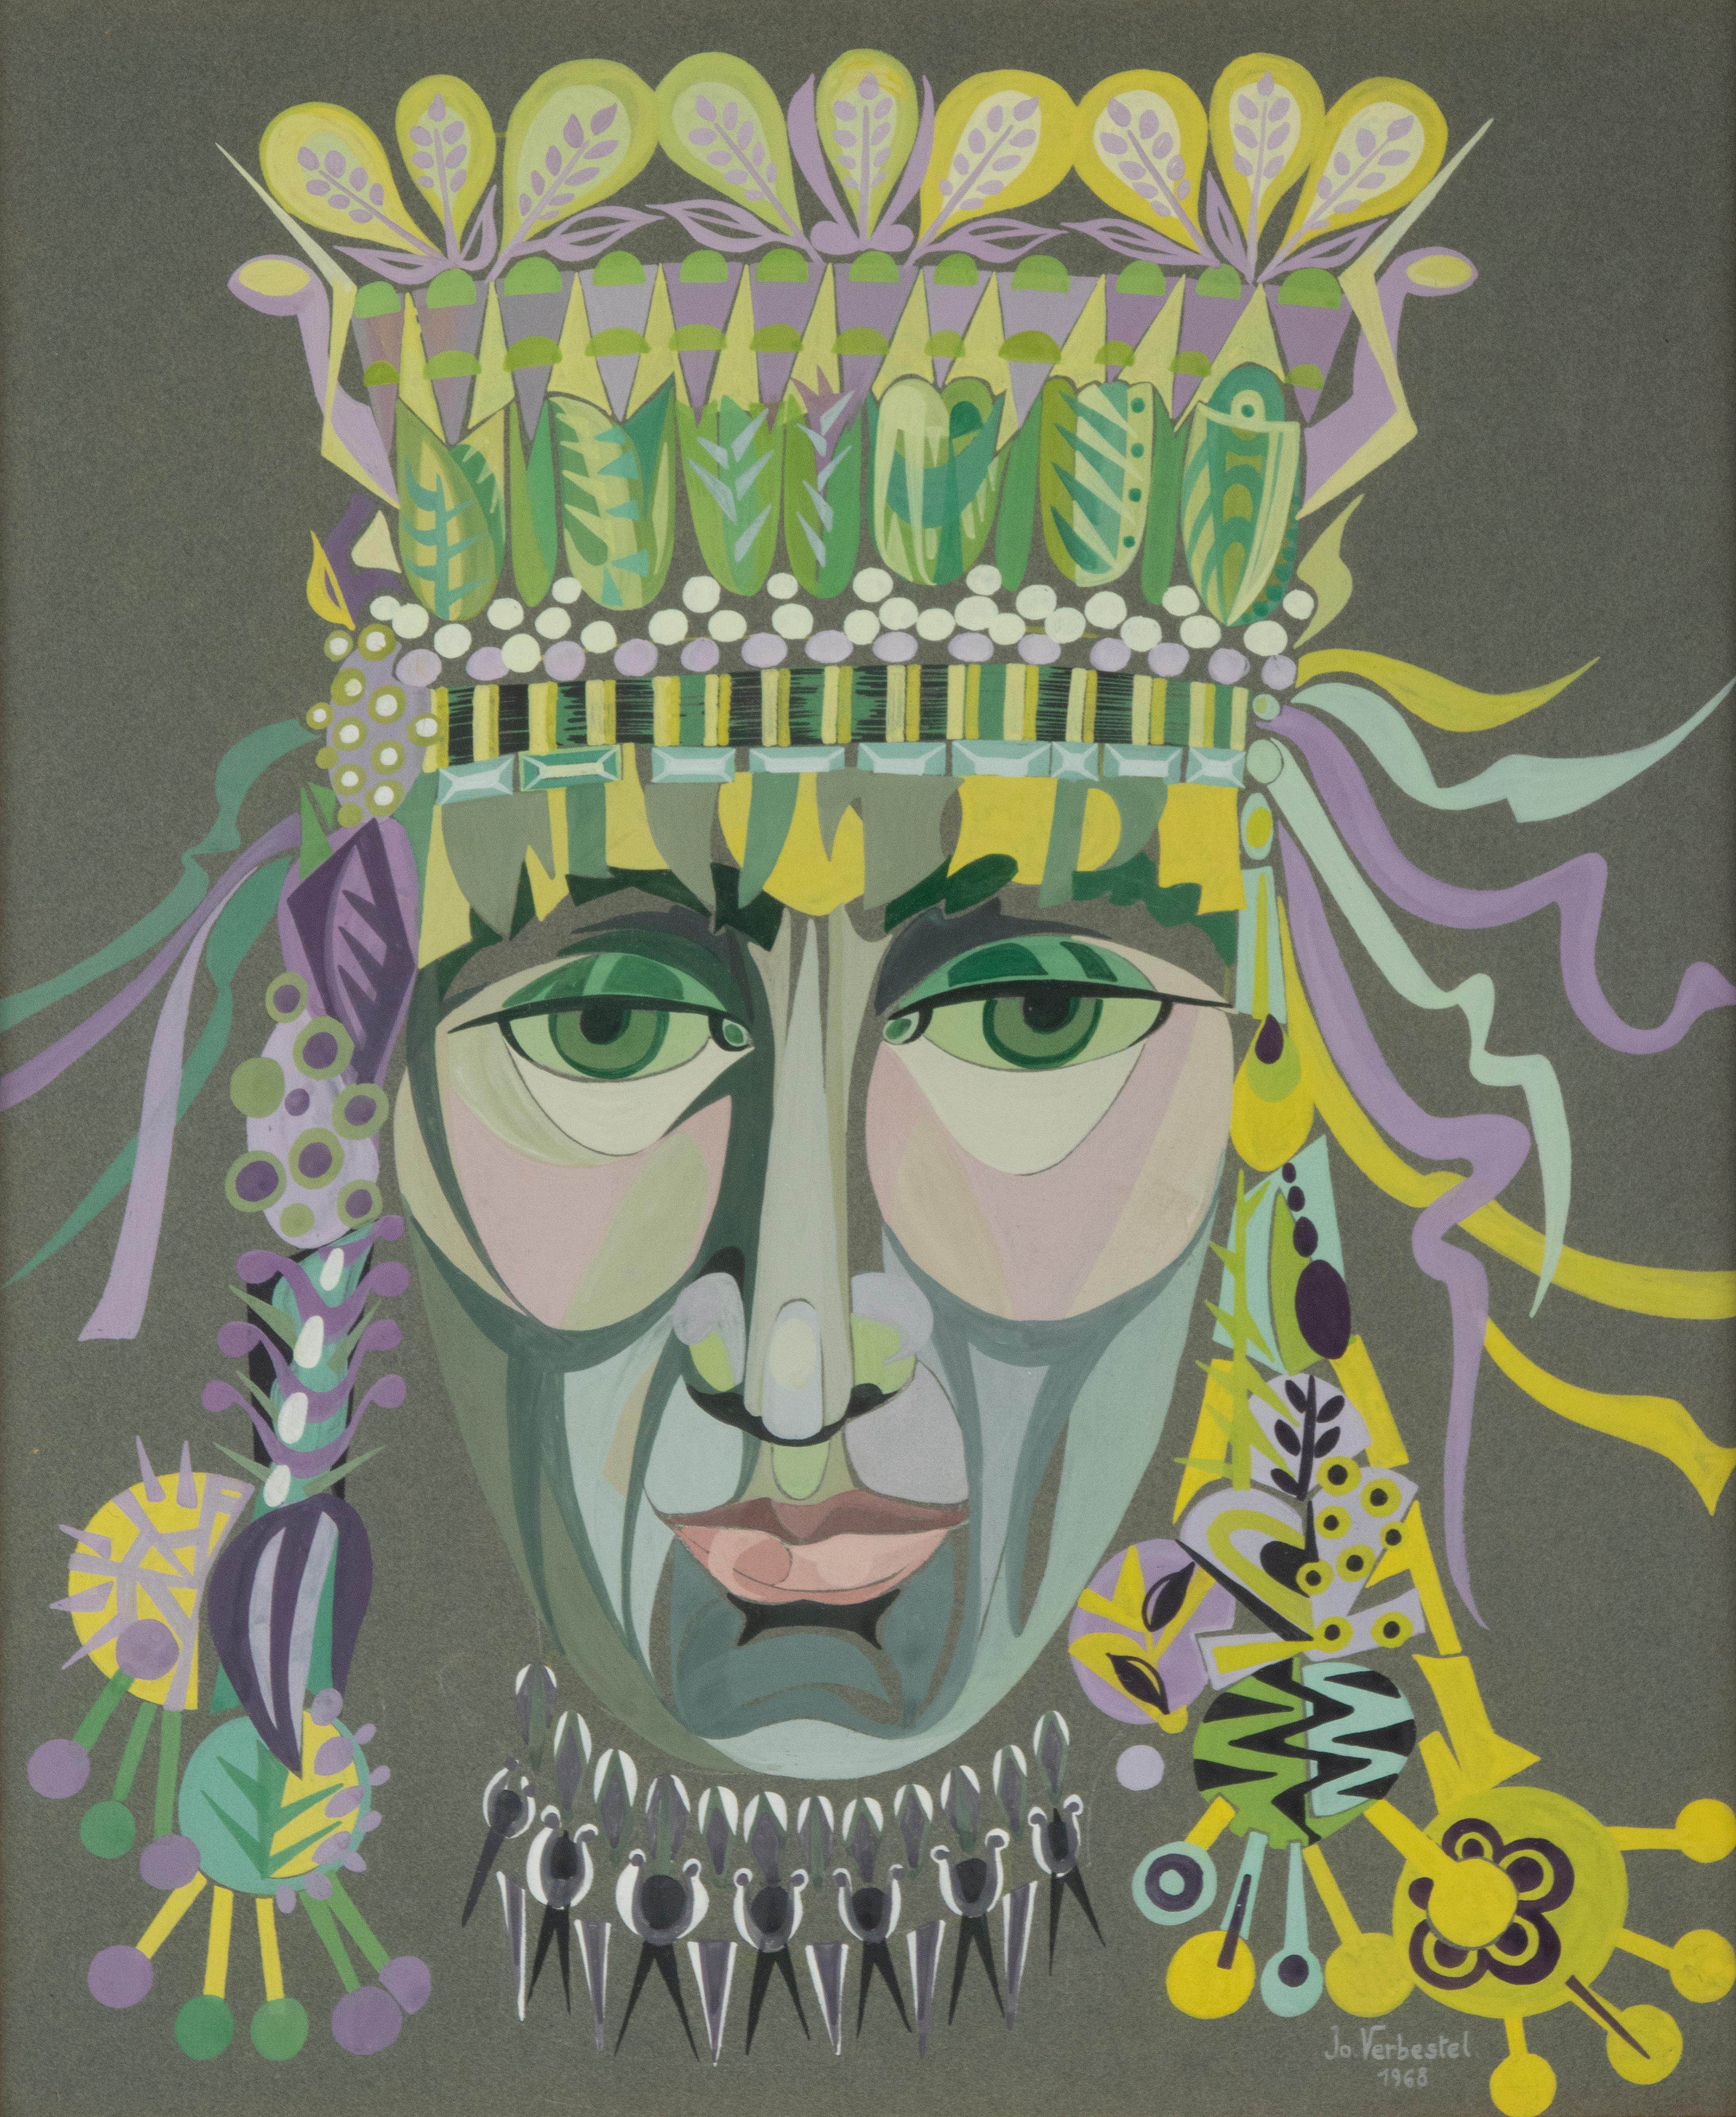 Beautiful work of art, gouache on paper, by the Belgian female artist Jo Verbestel. It is a portrait of a mythical figure / fantasy figure, in a somewhat psychedelic style. The painting is dated 1968 and also fits well with the zeitgeist. The